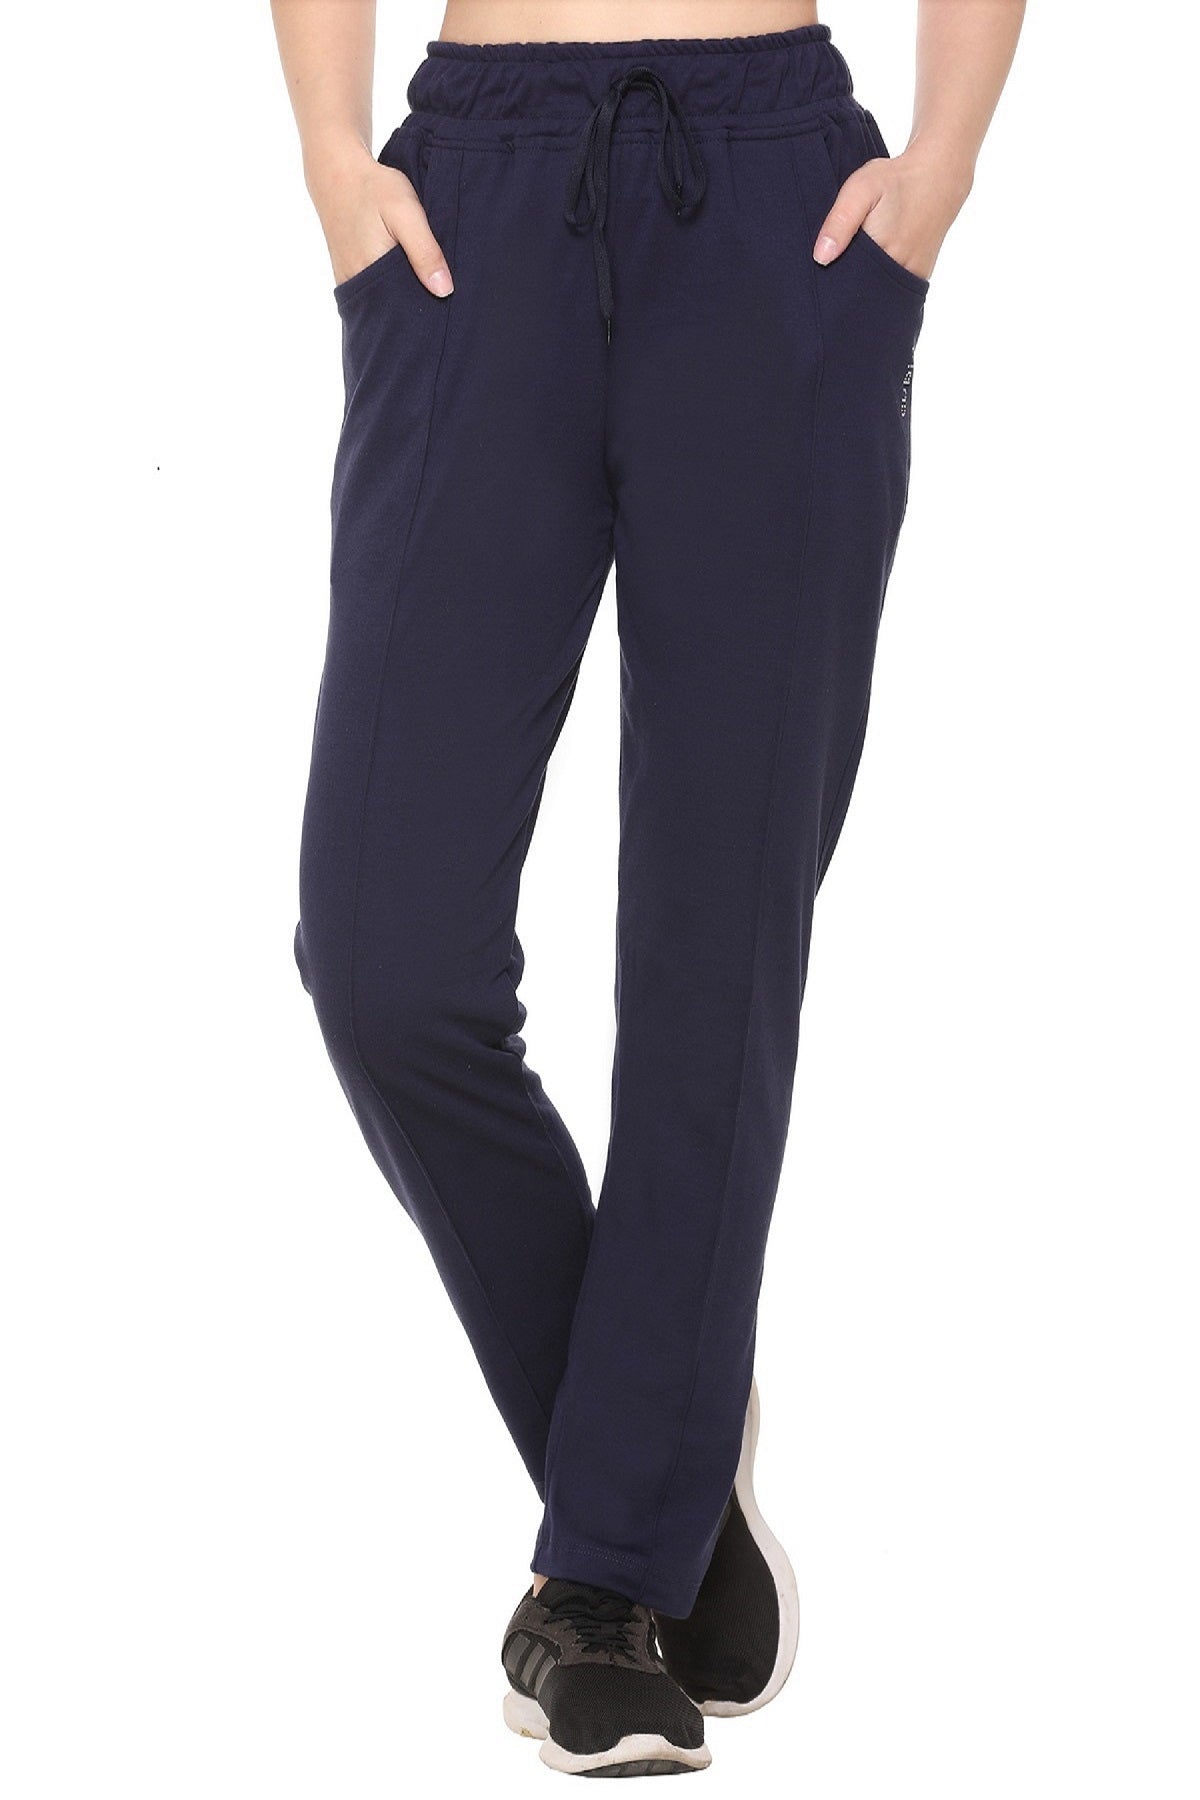 Buy Regular Fit Cotton Imperial Blue Track pants for Women online